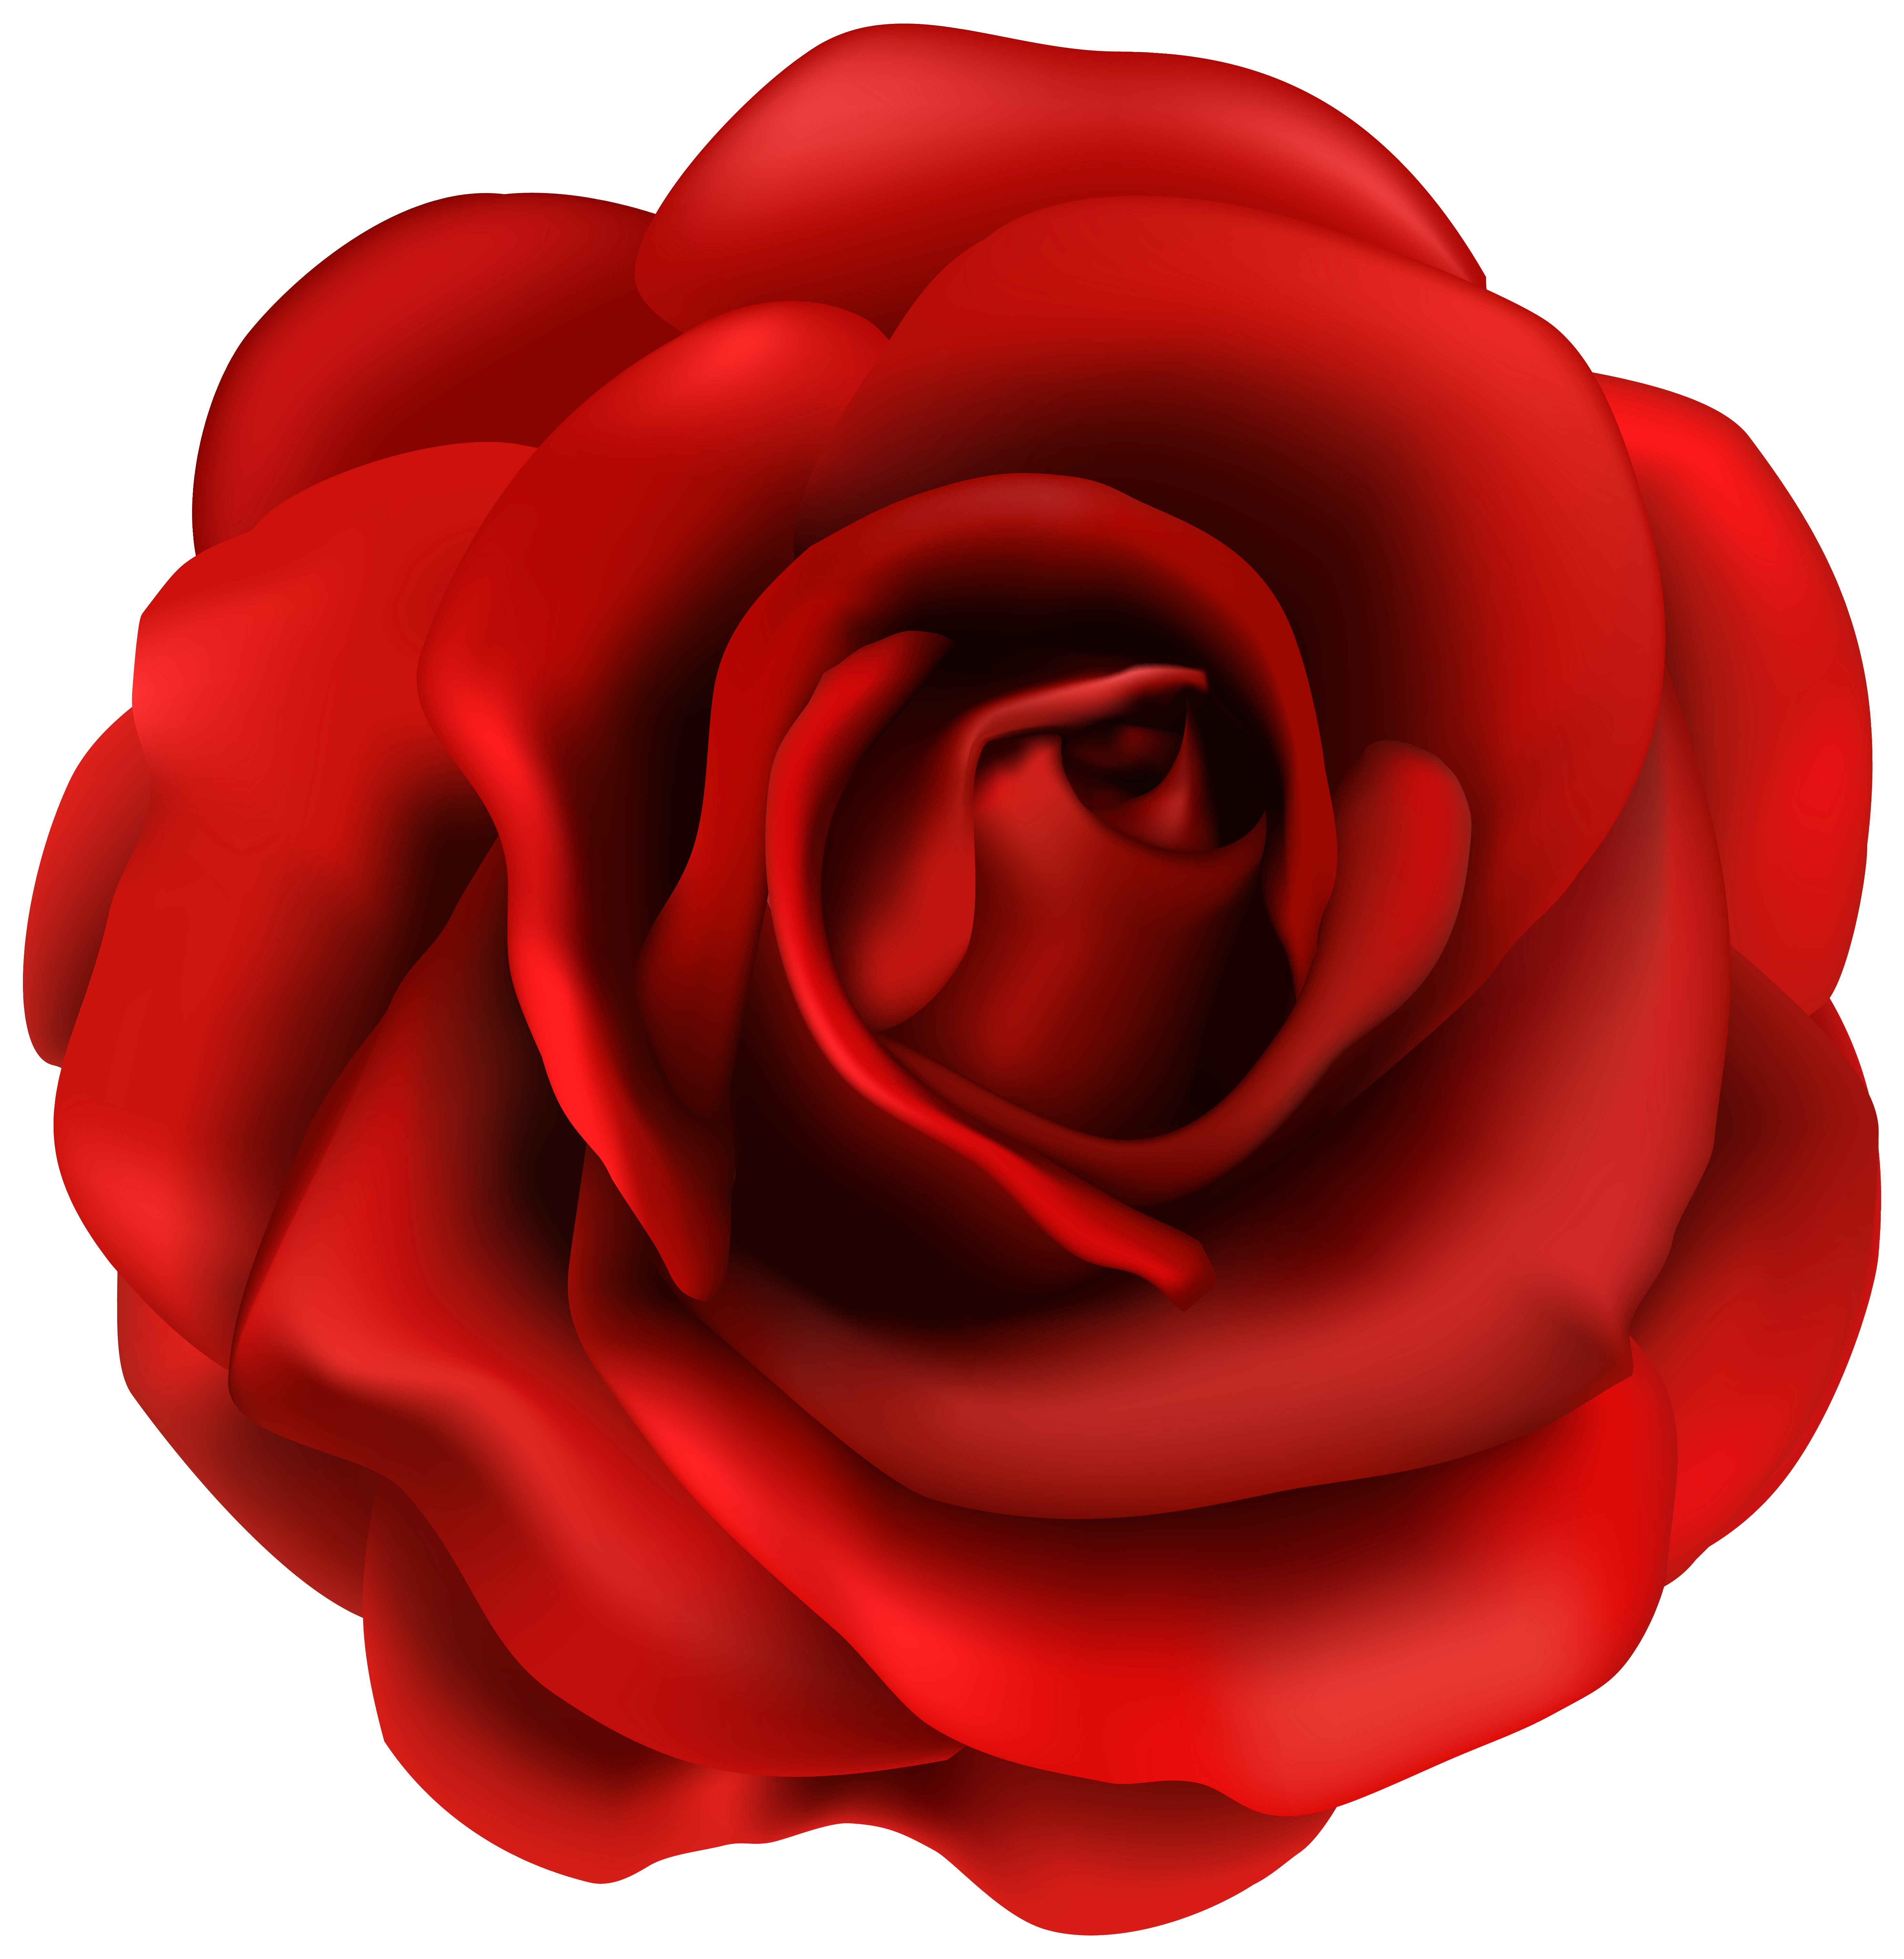 Red Rose Flower PNG Clipart Image